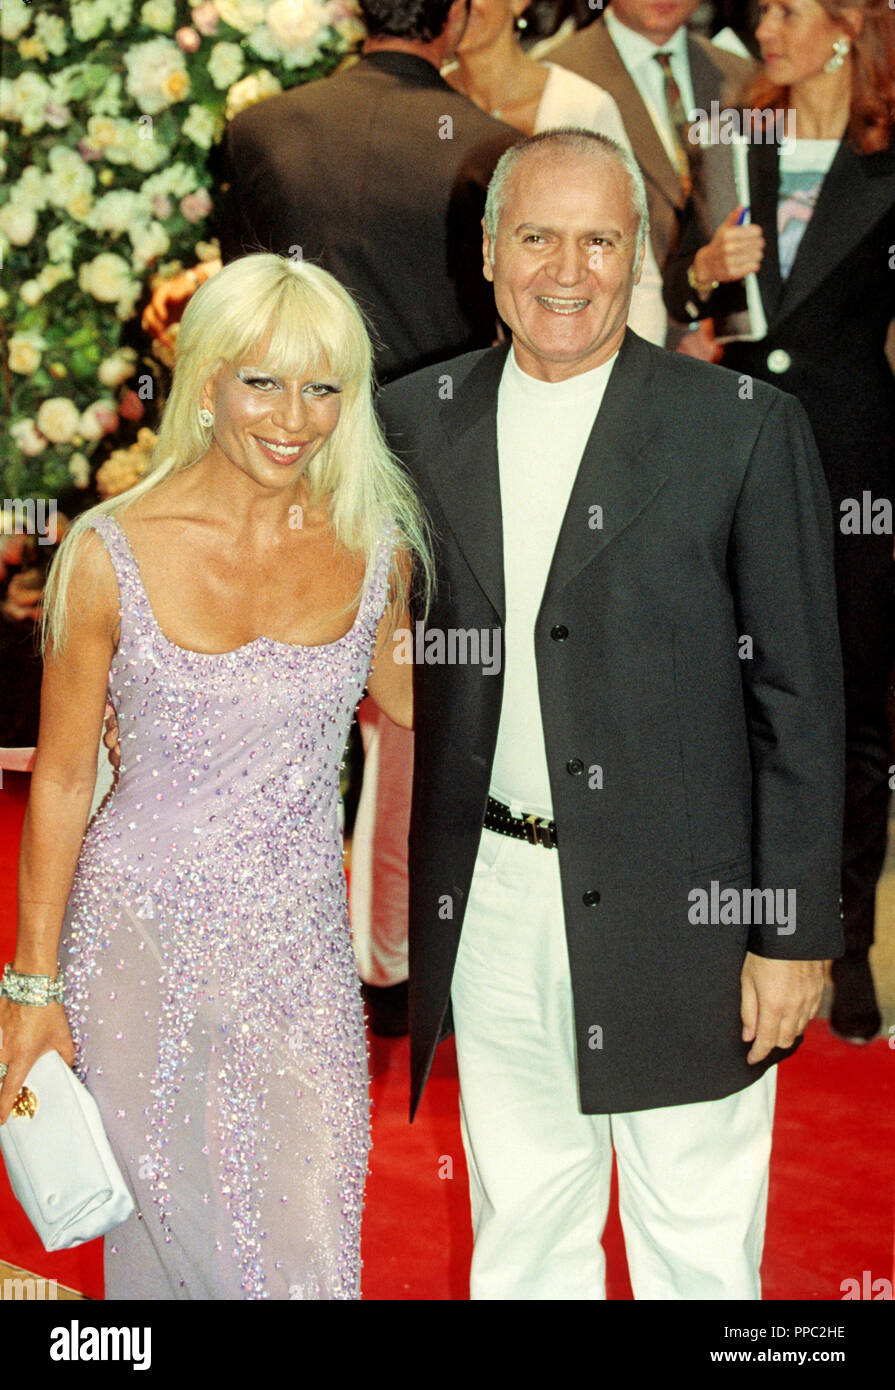 Gianni Versace arriving at his party in London, with Donatella Versace ©  GRANATAIMAGES Stock Photo - Alamy